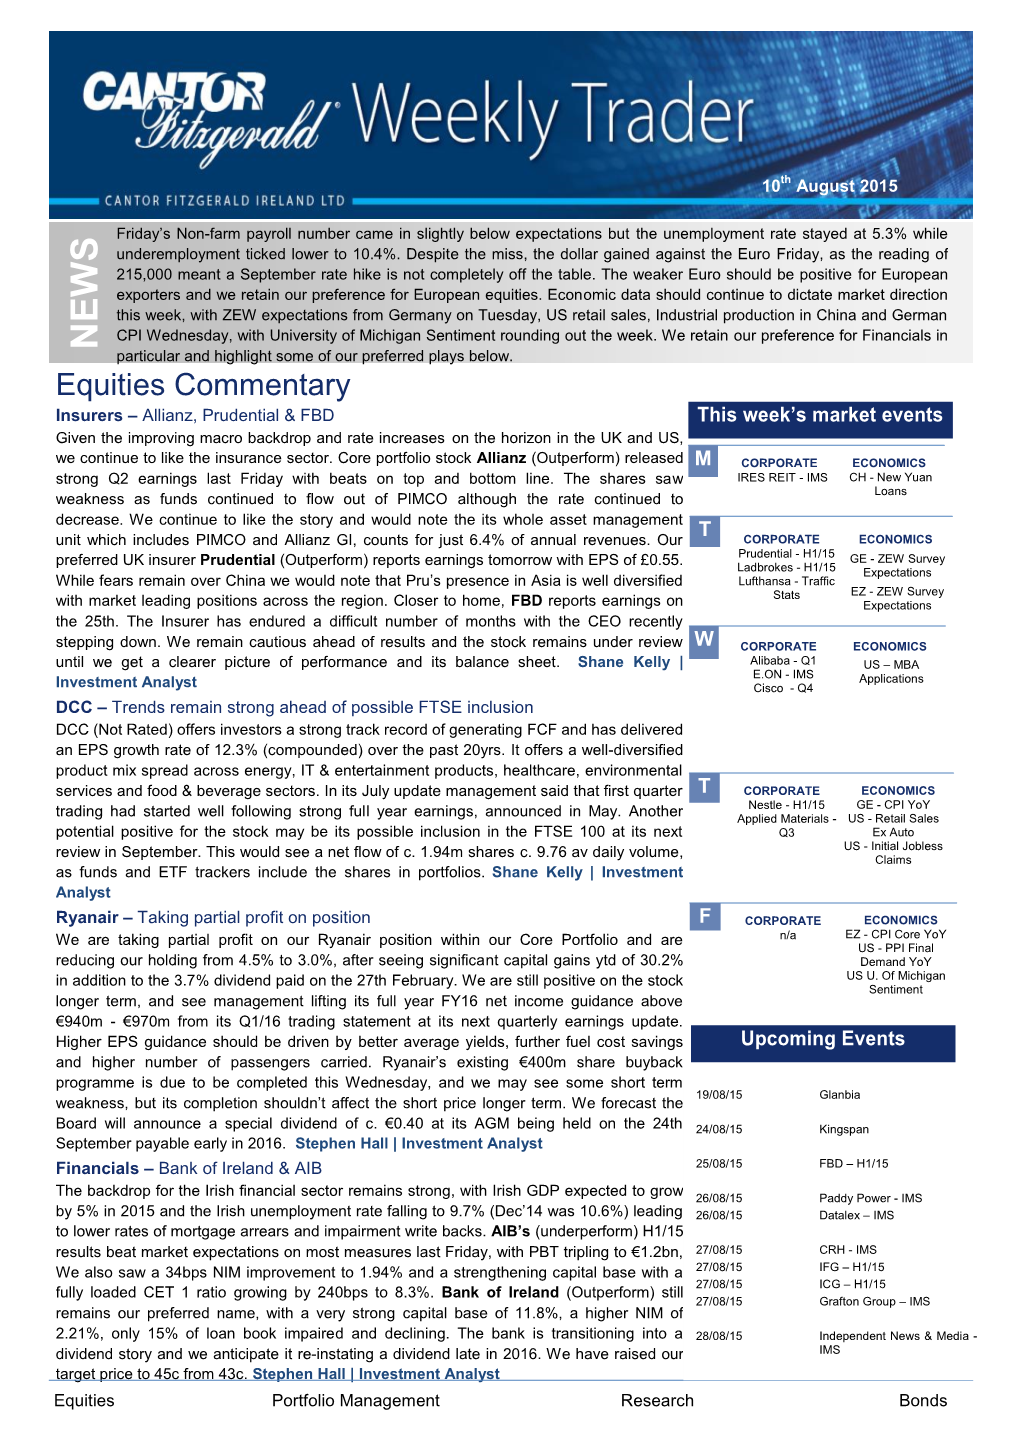 Equities Commentary